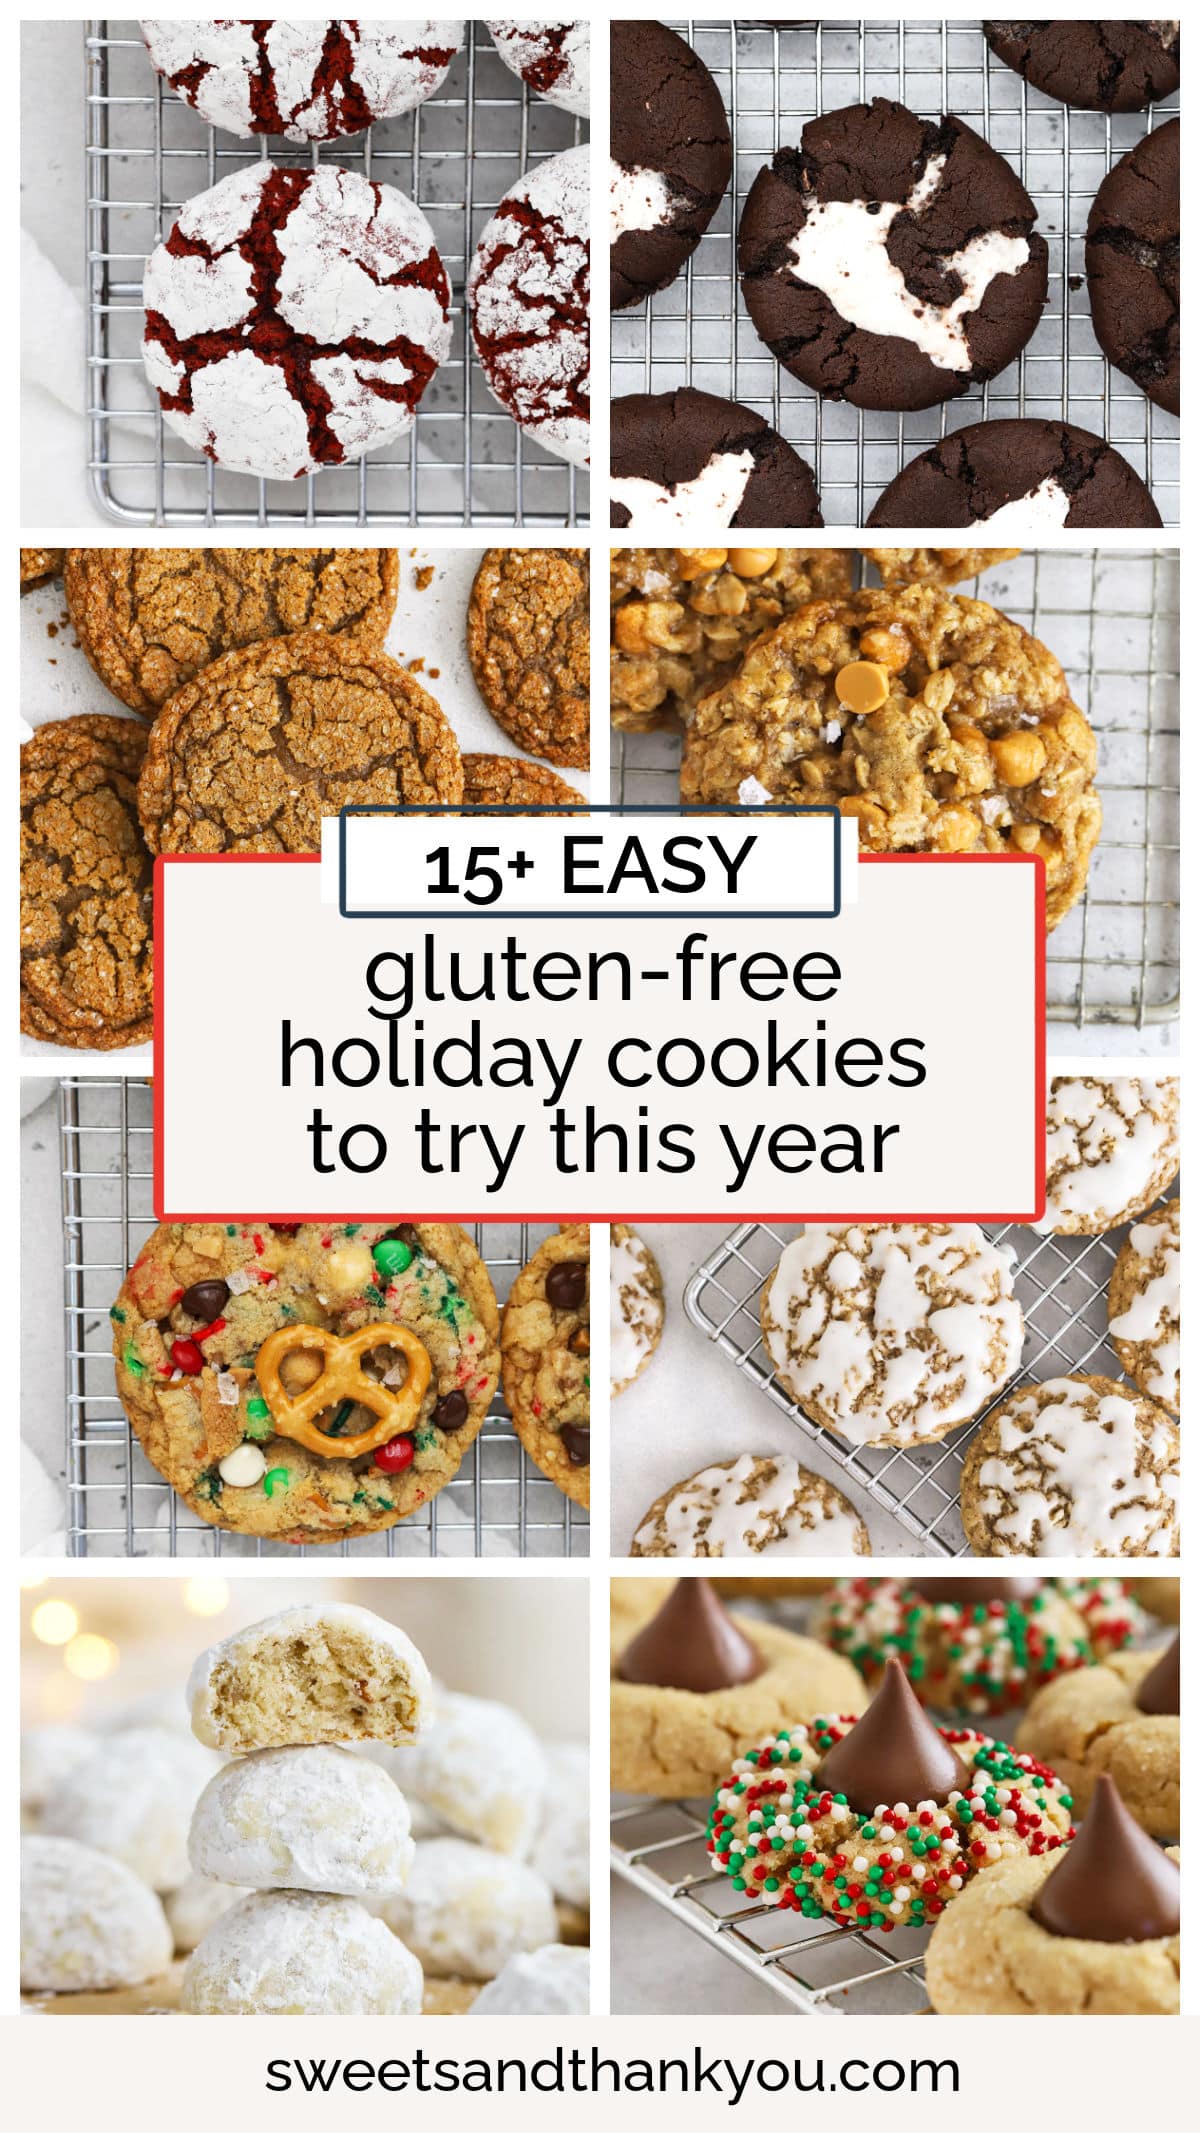 15+ of the BEST gluten-free holiday cookie recipes to try this year--PERFECT for a cookie exchange or holiday baking. From classic gluten-free Christmas cookies to the best cookies for a gluten-free cookie exchange or gluten-free cookie plate, we've got you covered. There's a gluten-free holiday cookie for everyone!